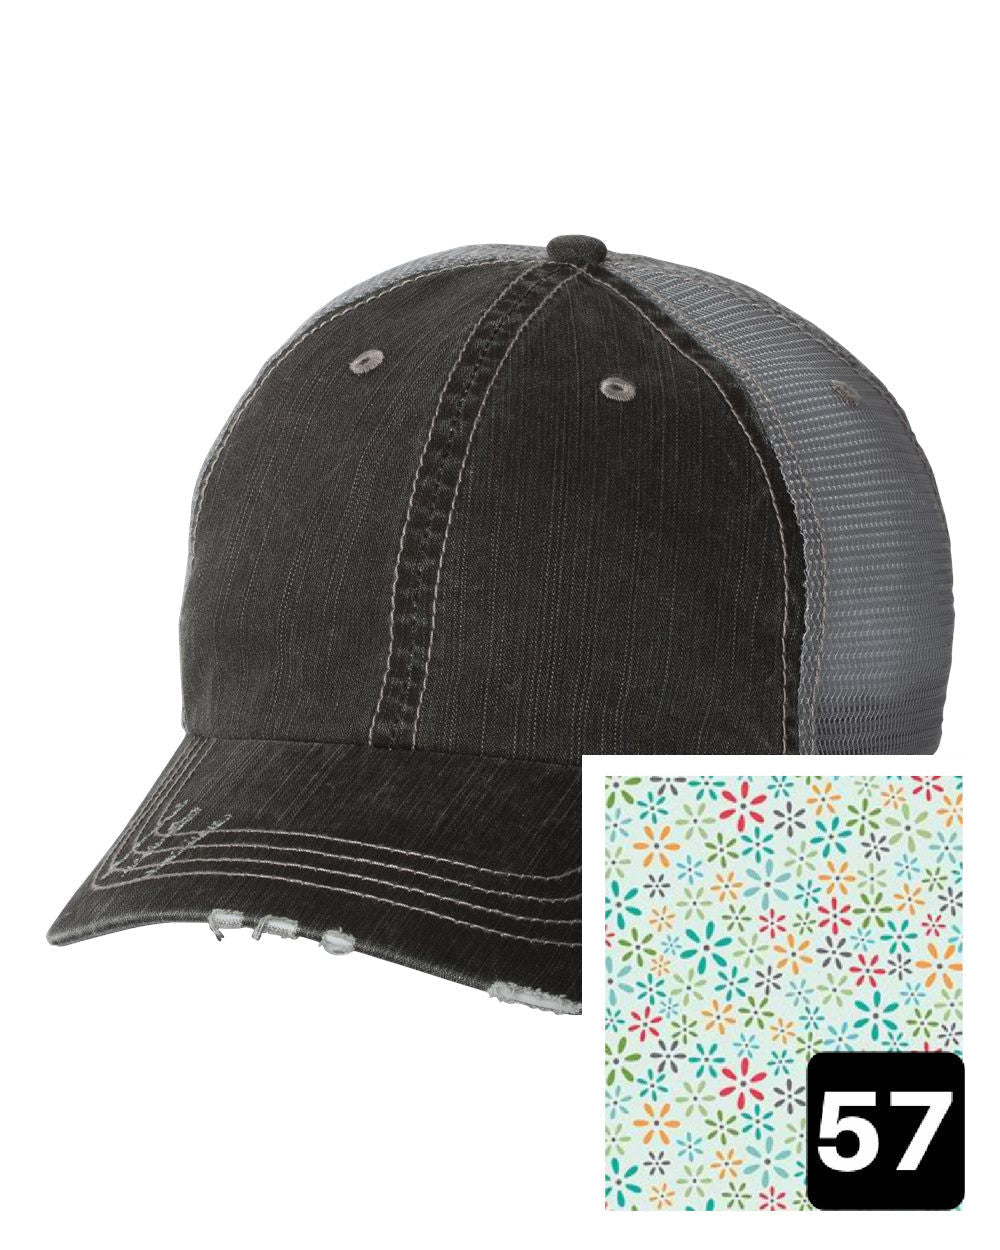 gray distressed trucker hat with white daisy on yellow fabric state of Nevada